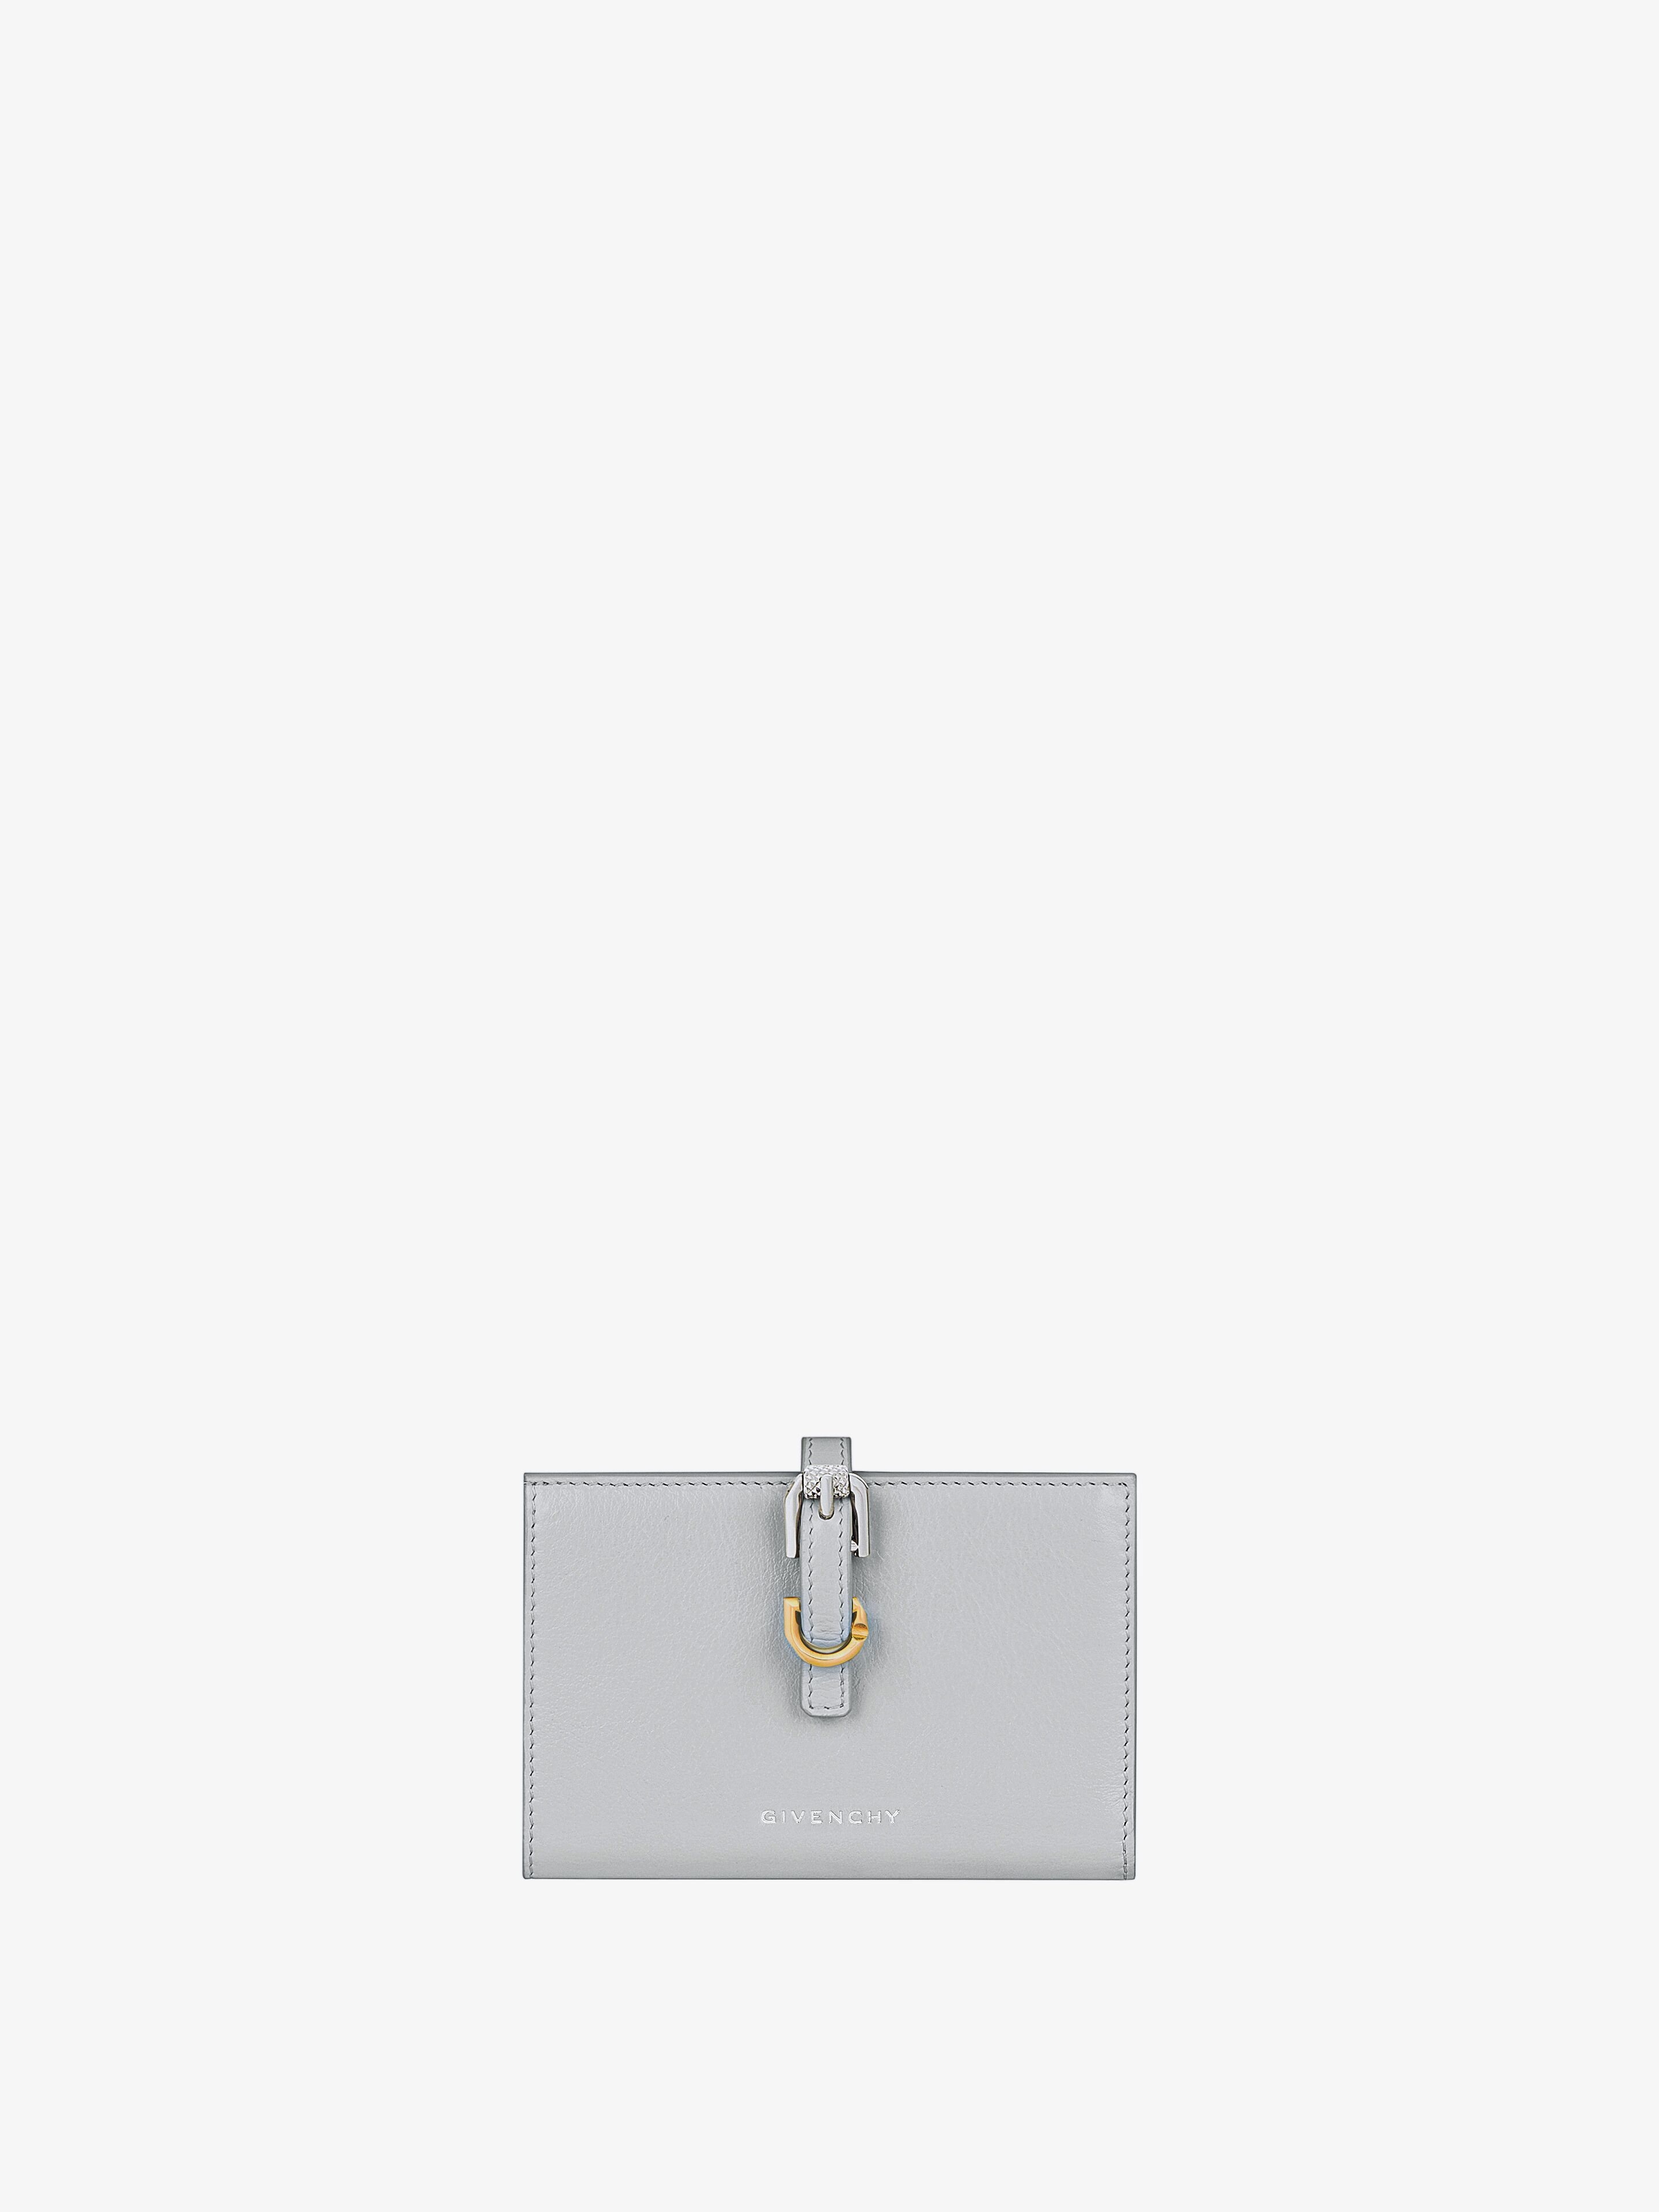 Givenchy Women's Voyou Wallet In Leather In Light Grey